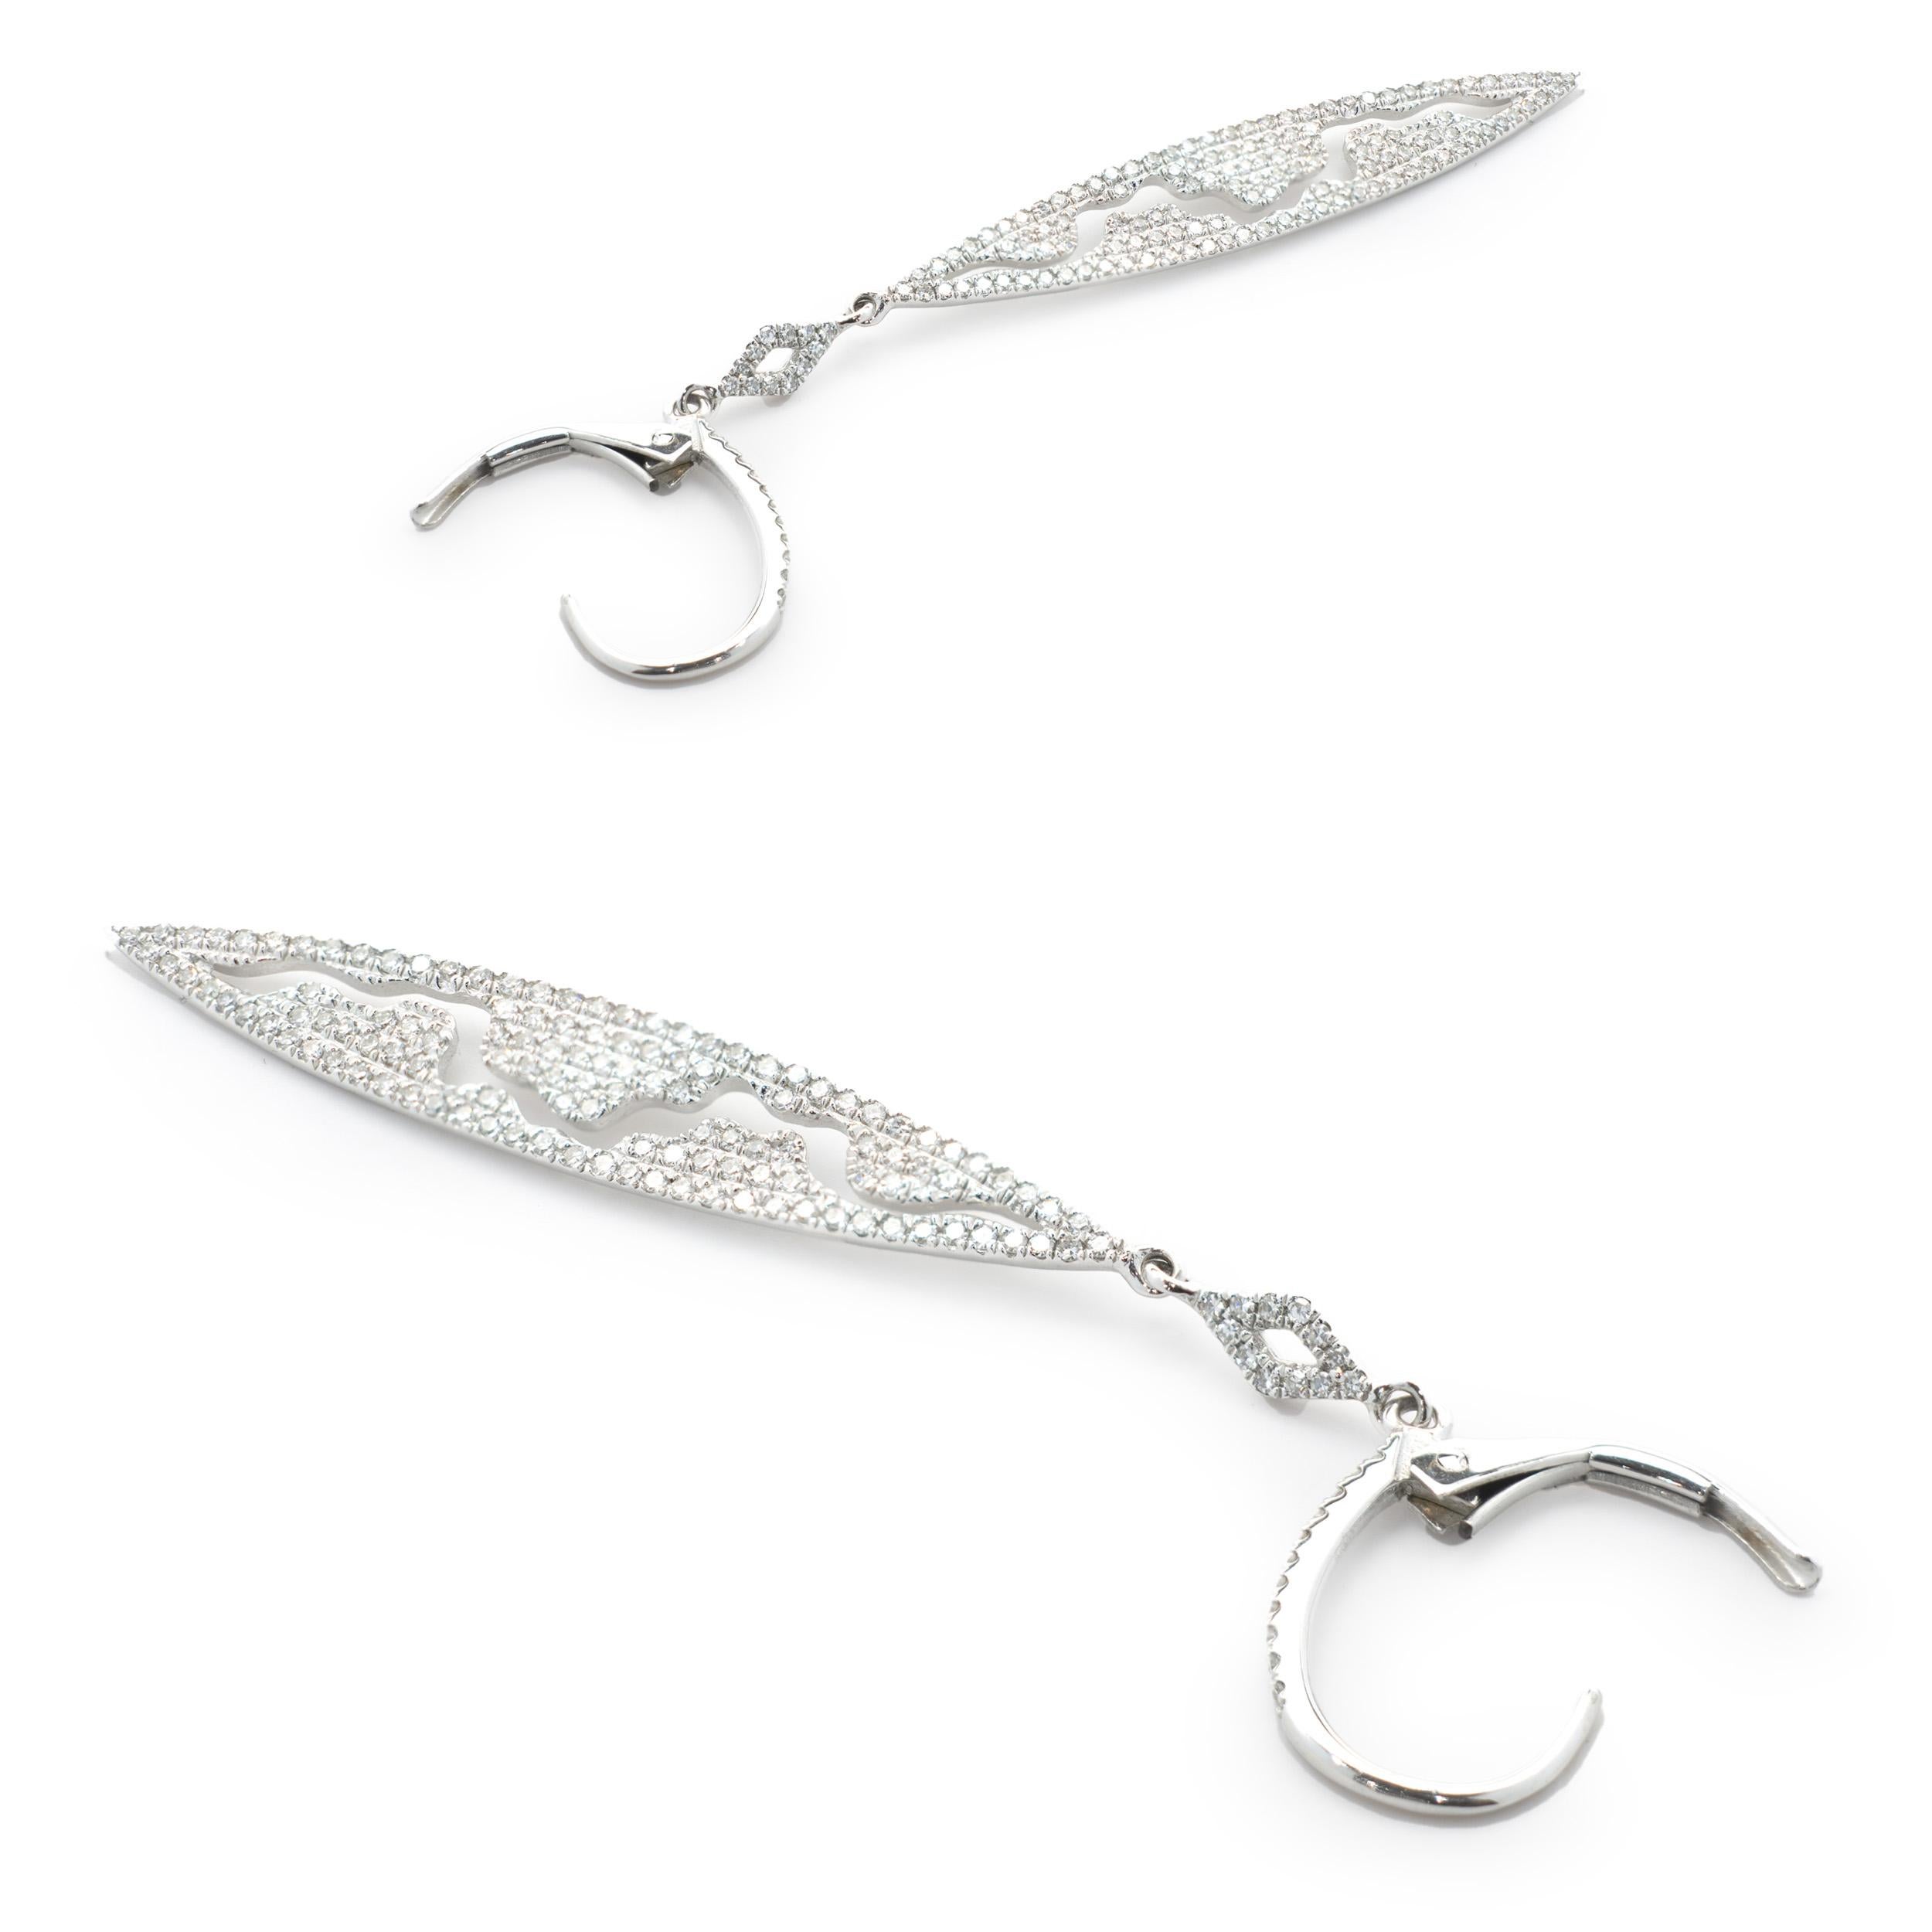 14 Karat White Gold Pave Diamond Drop Earrings In Excellent Condition For Sale In Scottsdale, AZ